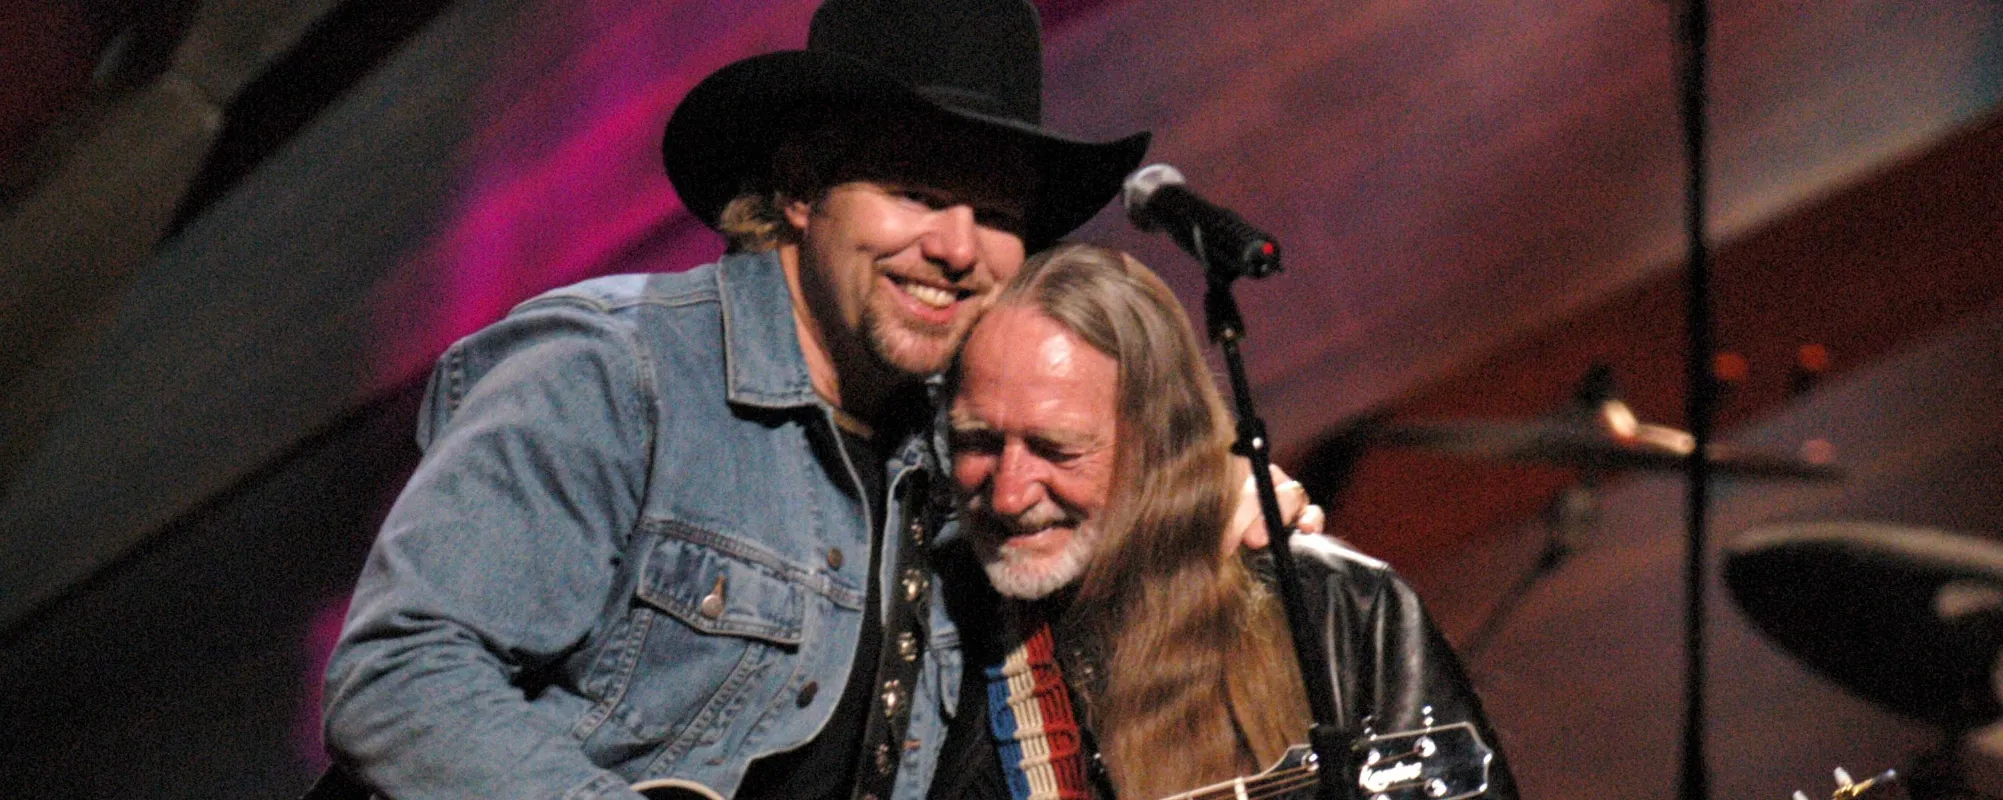 Willie Nelson Remembers Toby Keith with Throwback Performance Video of “Beer for My Horses”